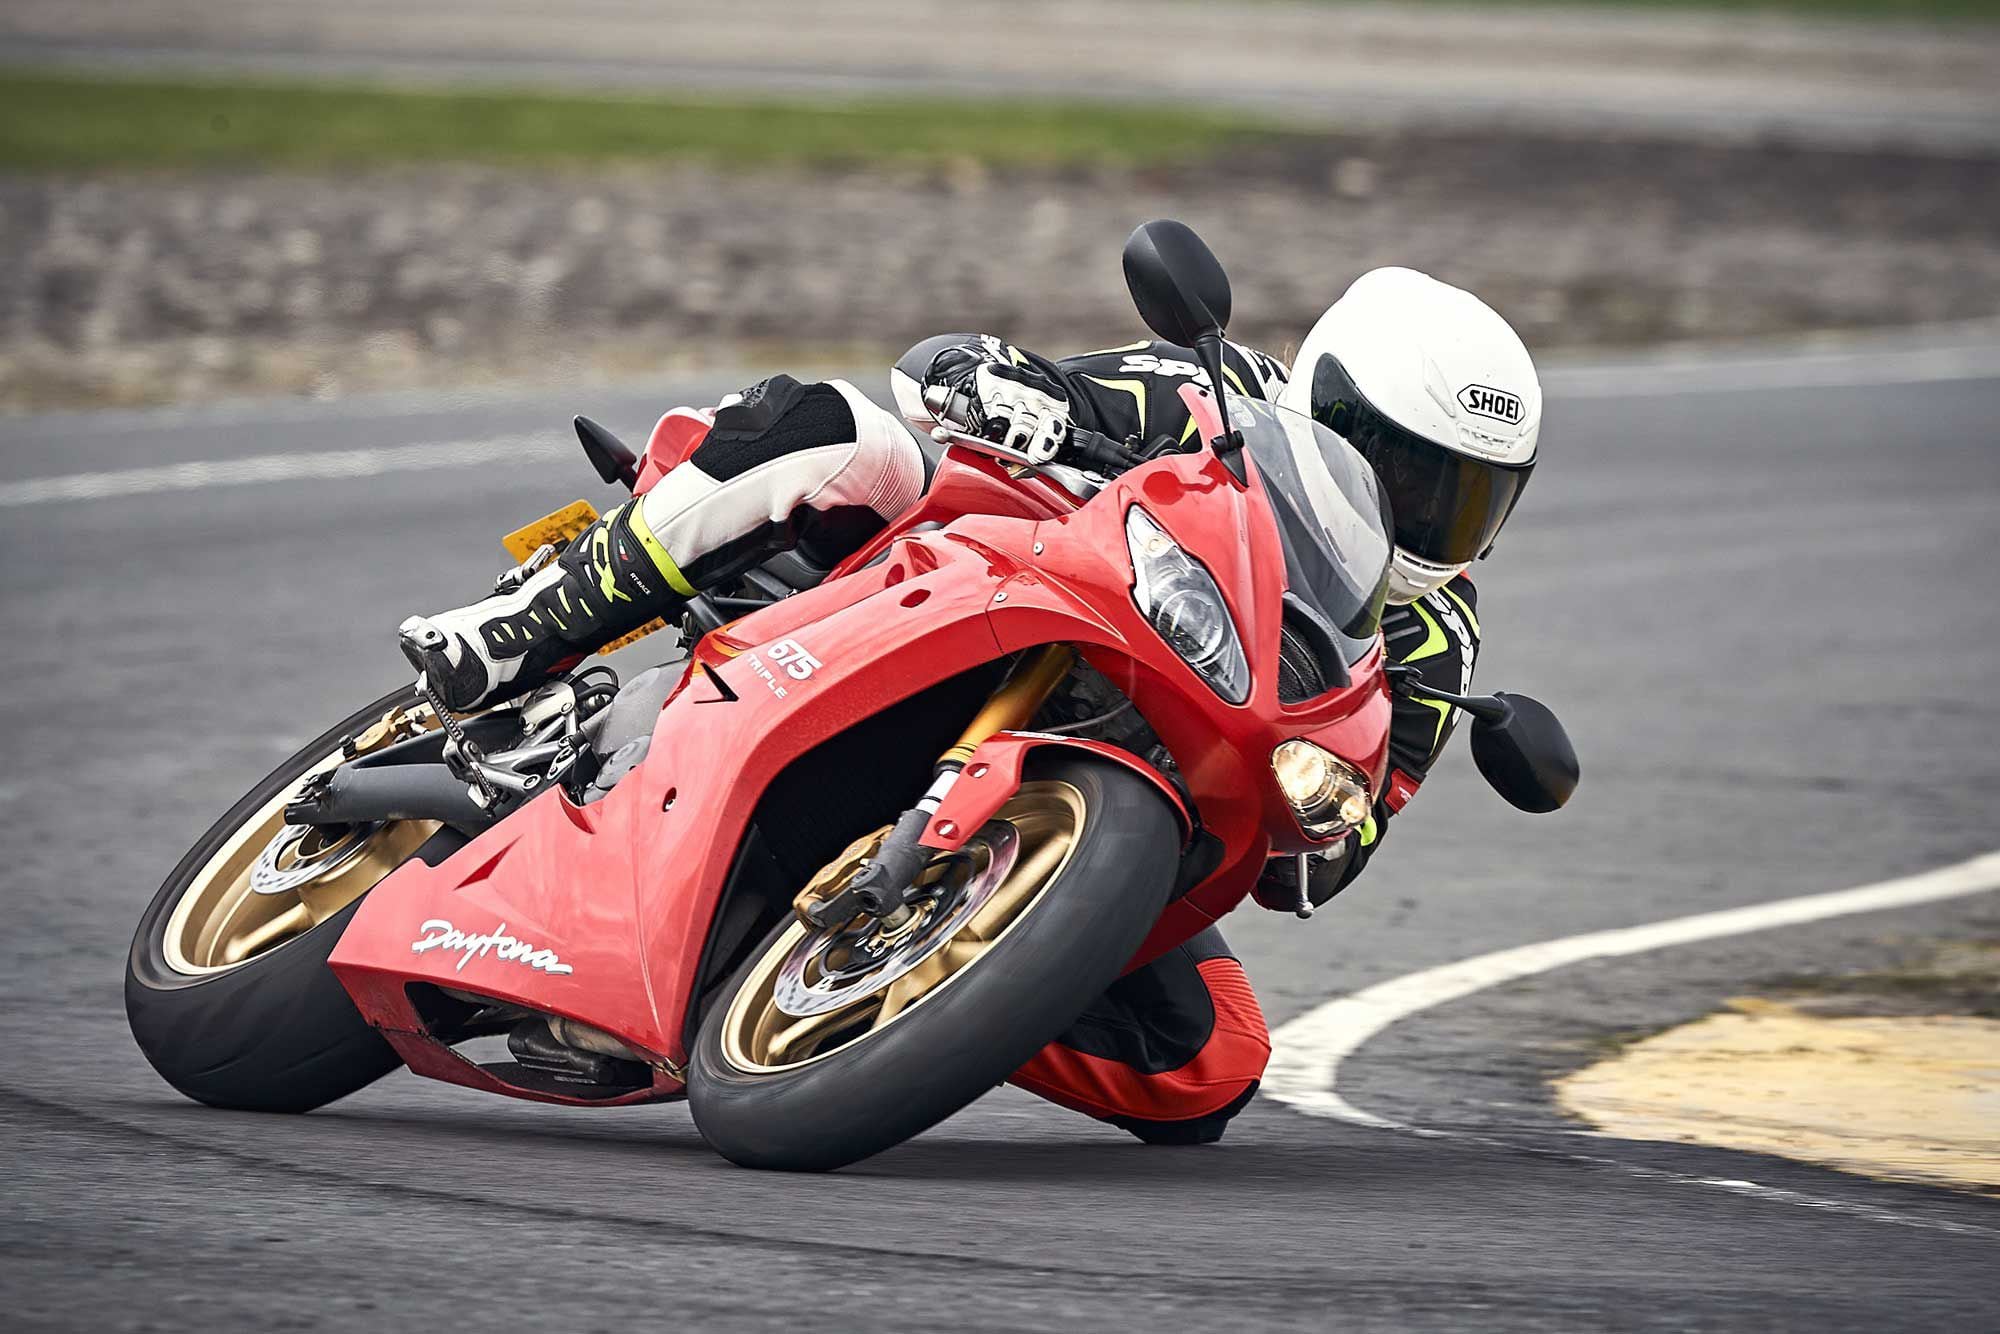 The only traction control system on the Daytona 675 is the rider’s right wrist.